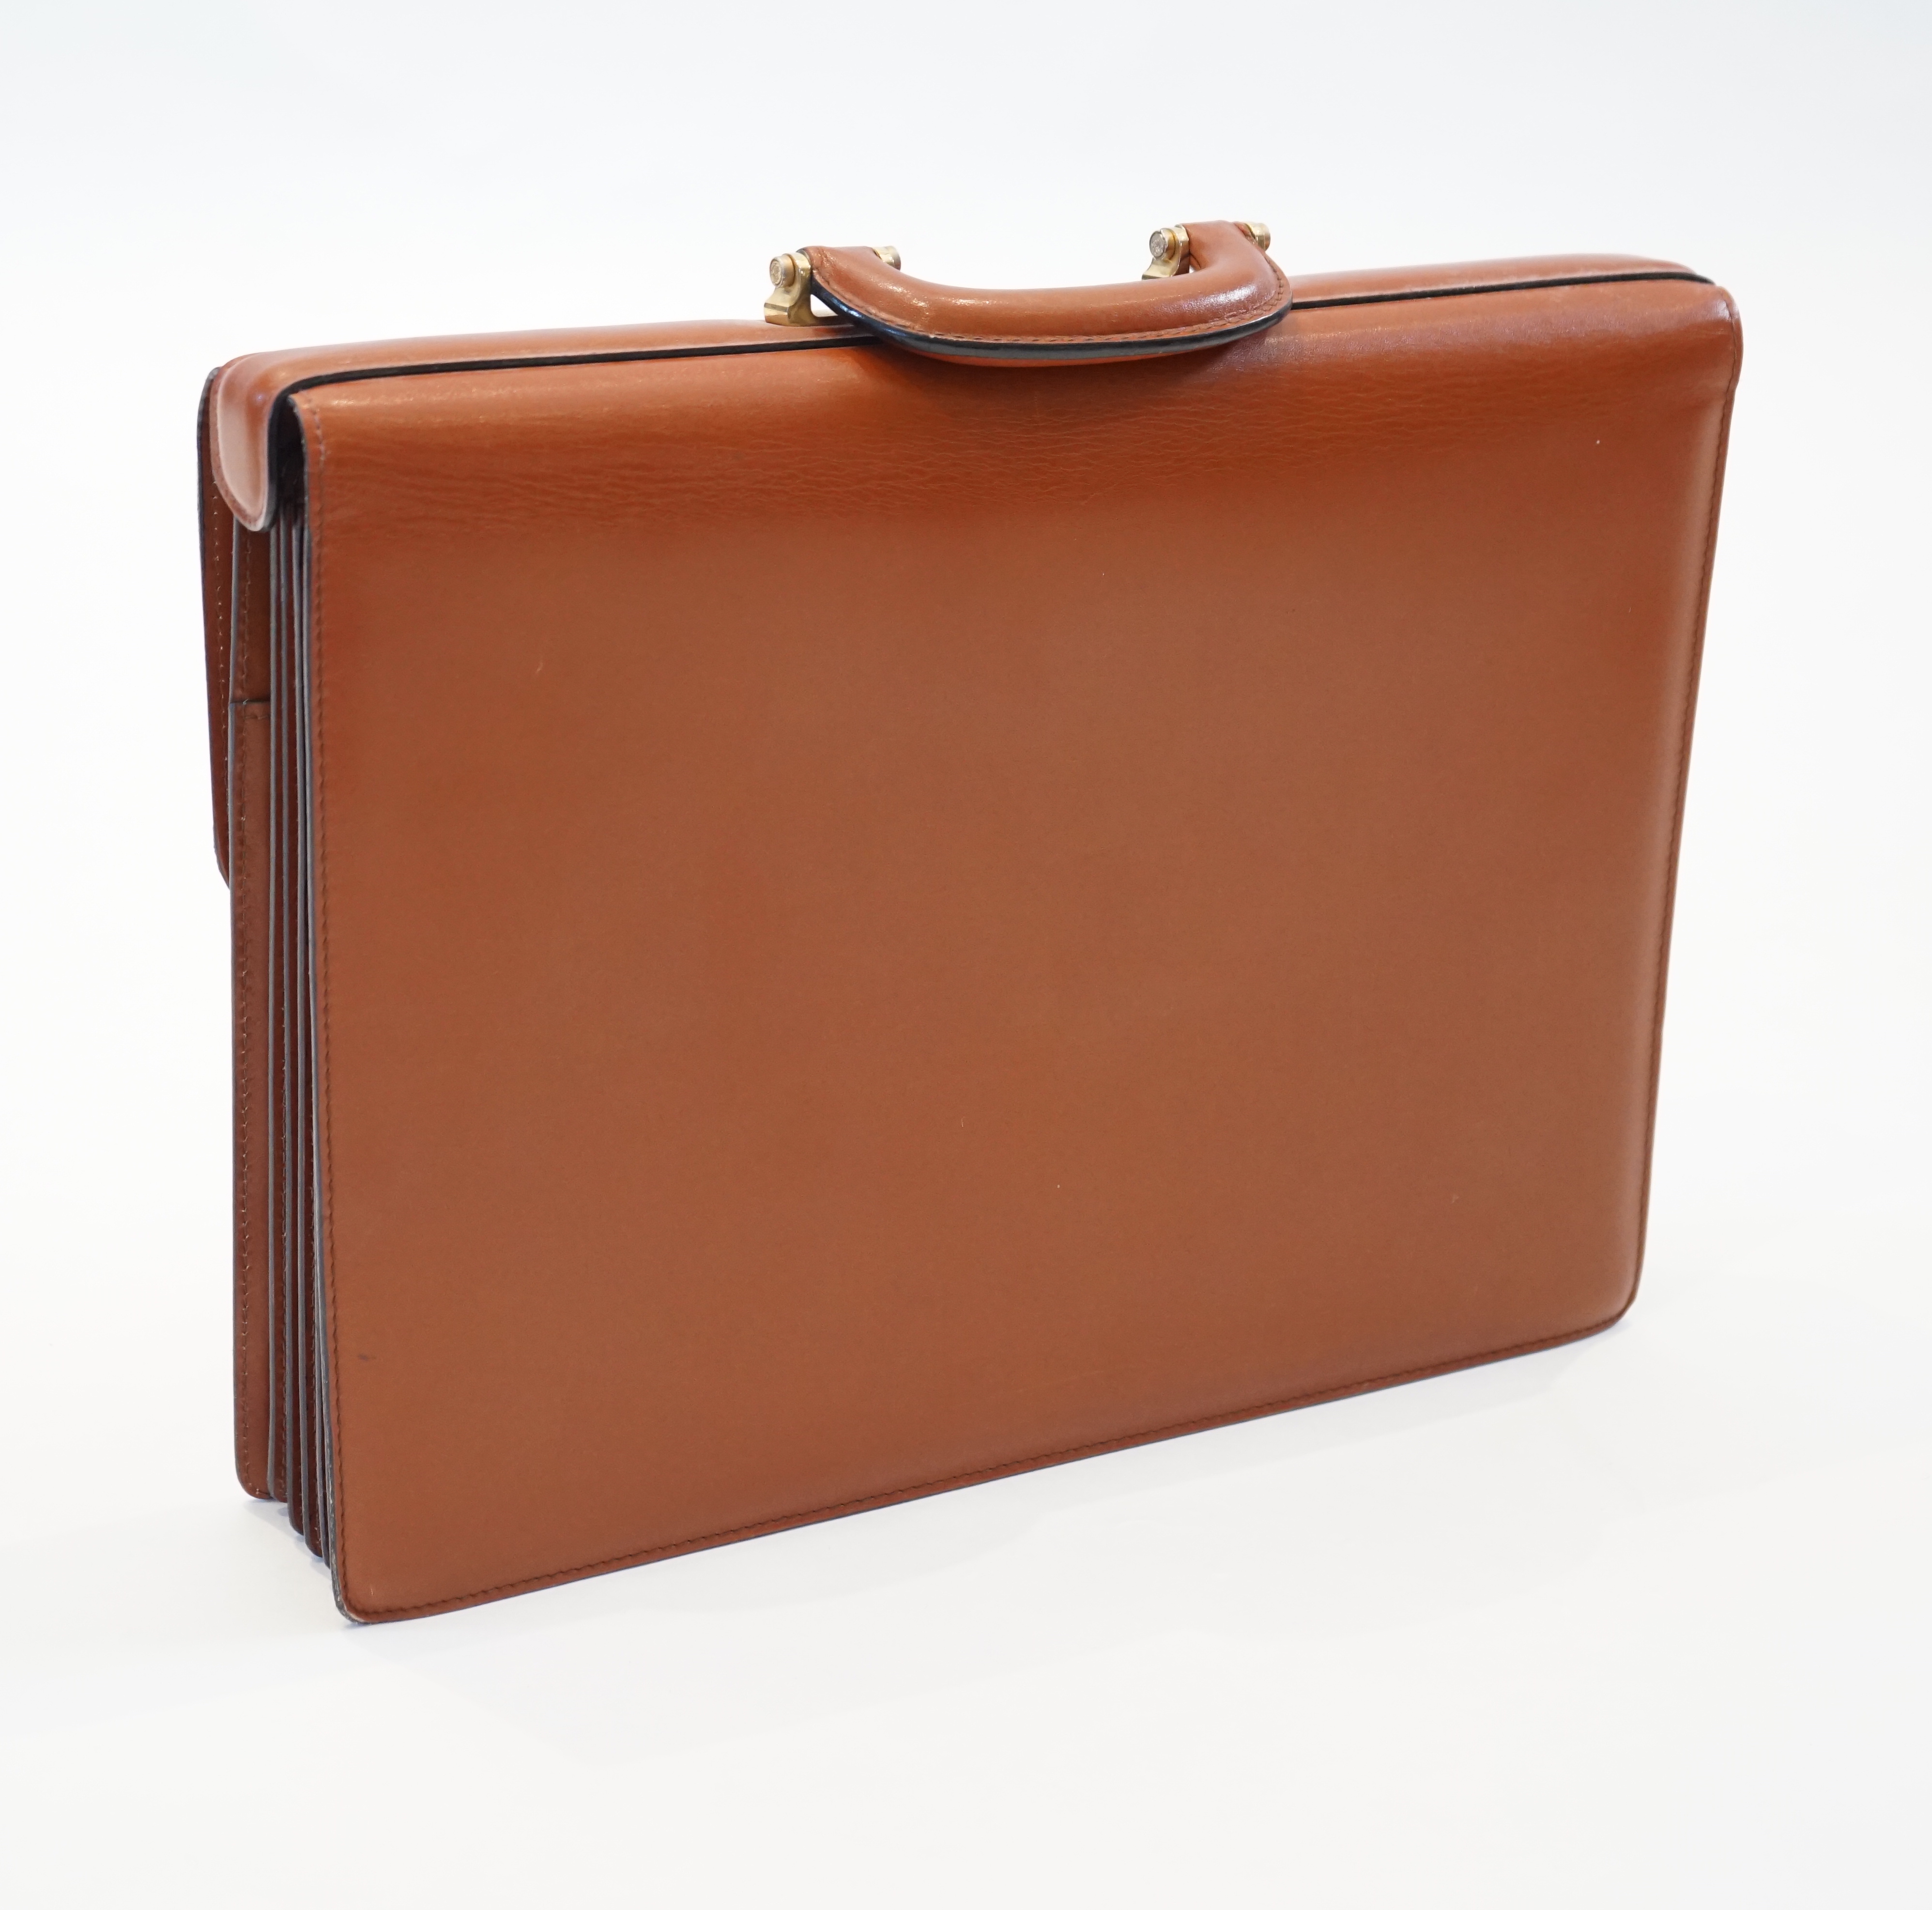 A gentlemen's Loewe brown tan leather briefcase with gold plated metalware, five division interior - Image 10 of 12